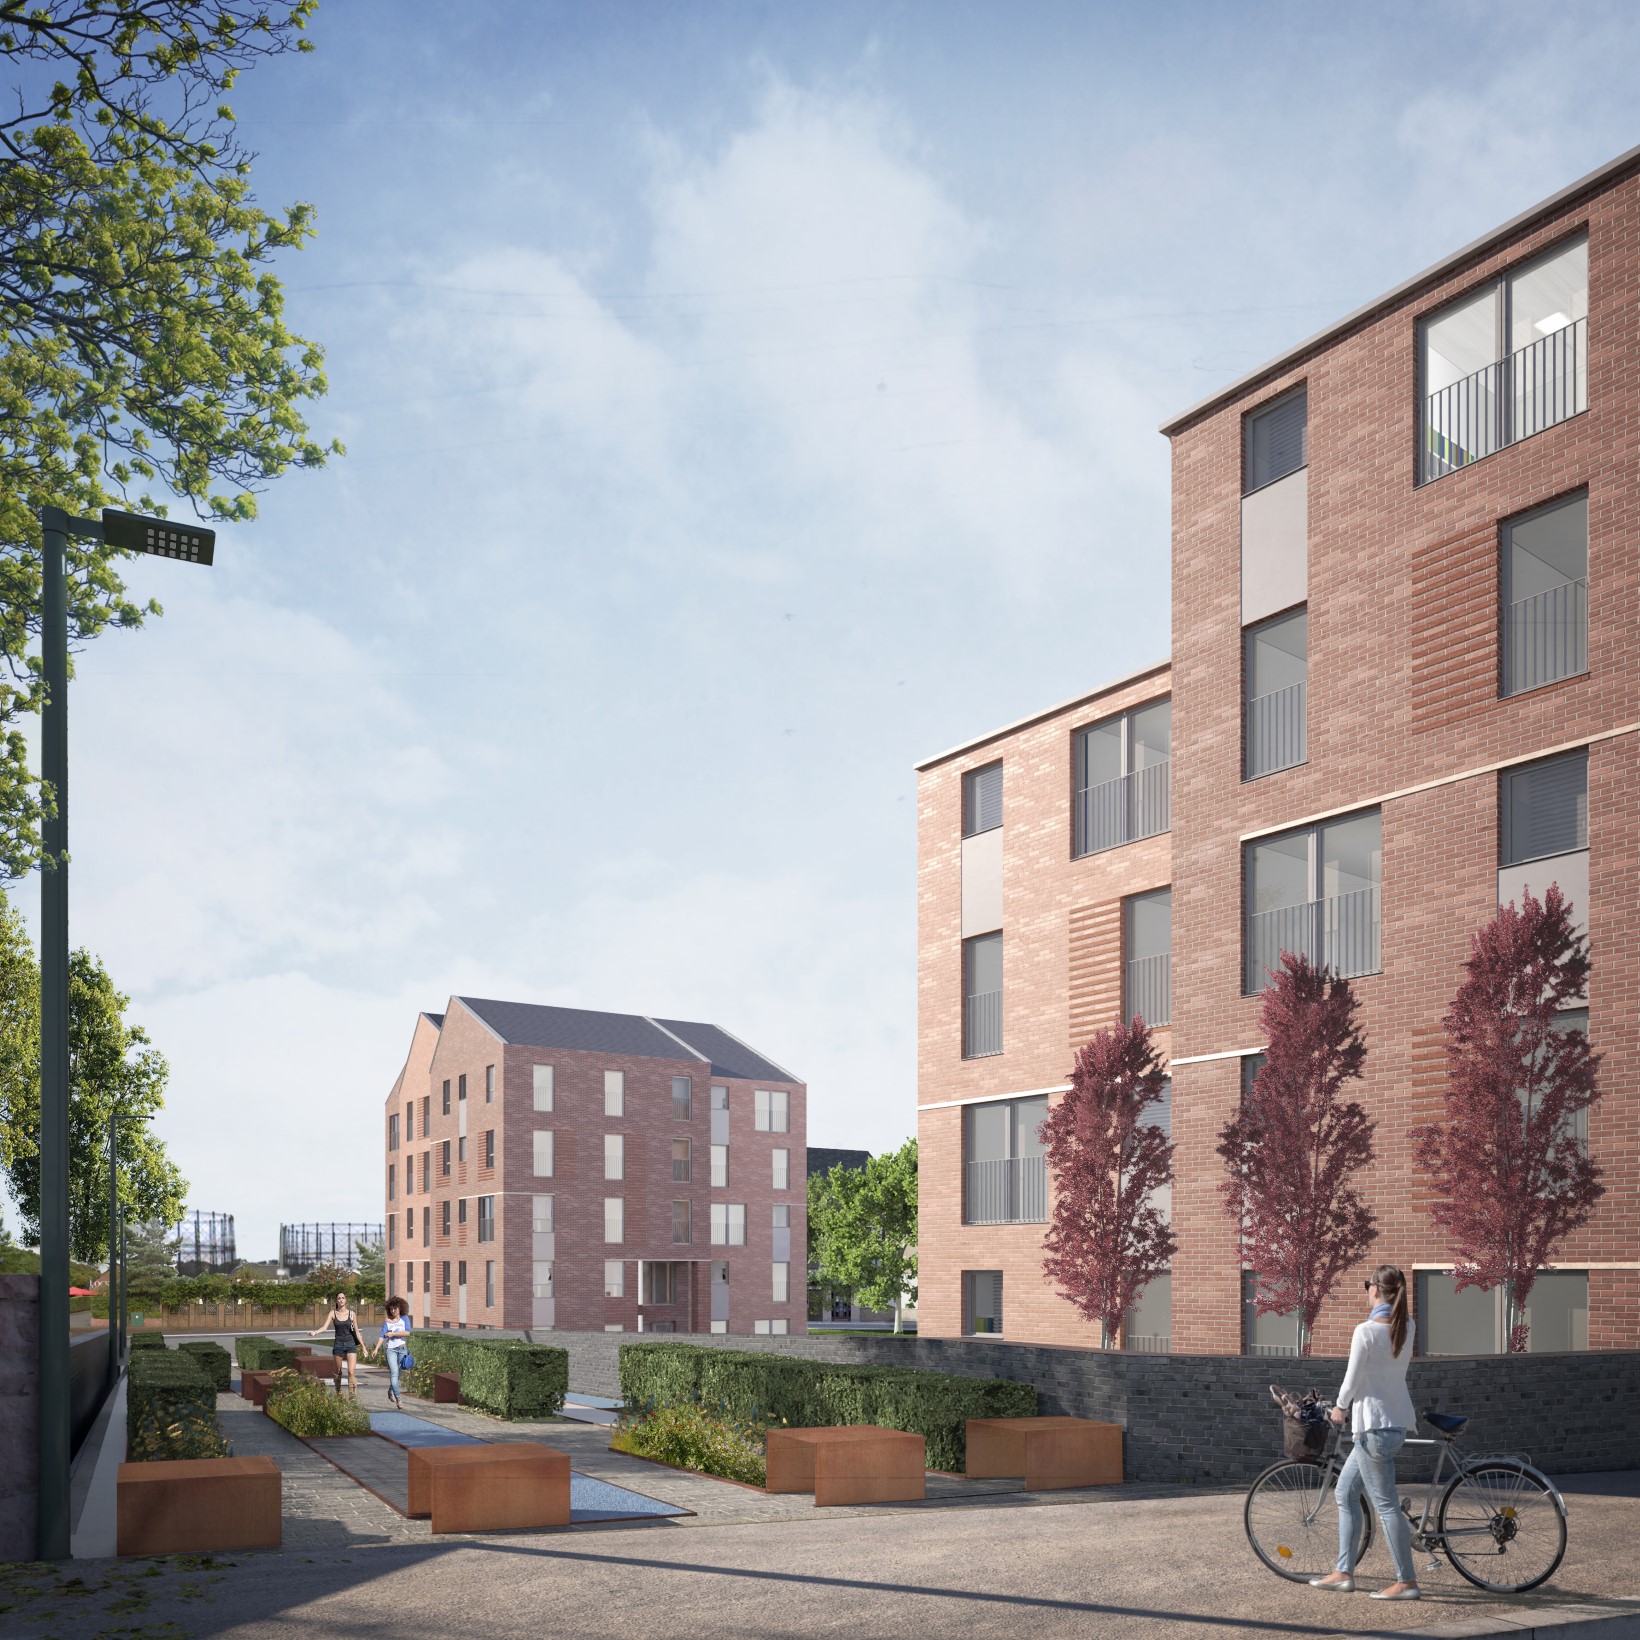 Decision delayed into joint Hanover and Partick Housing Association regeneration plan